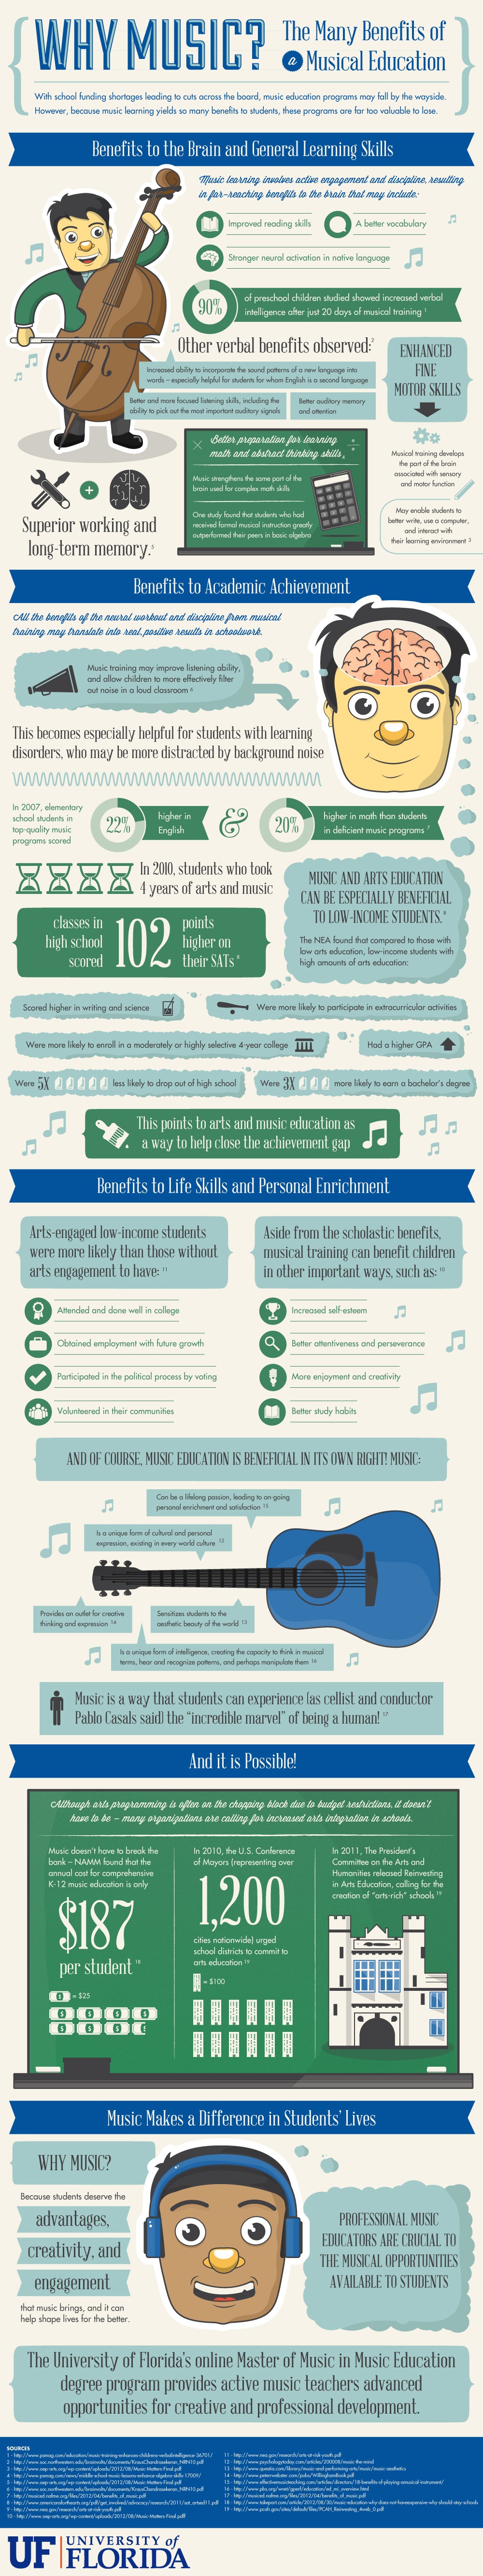 Benefits-of-Music-Education-Infographic